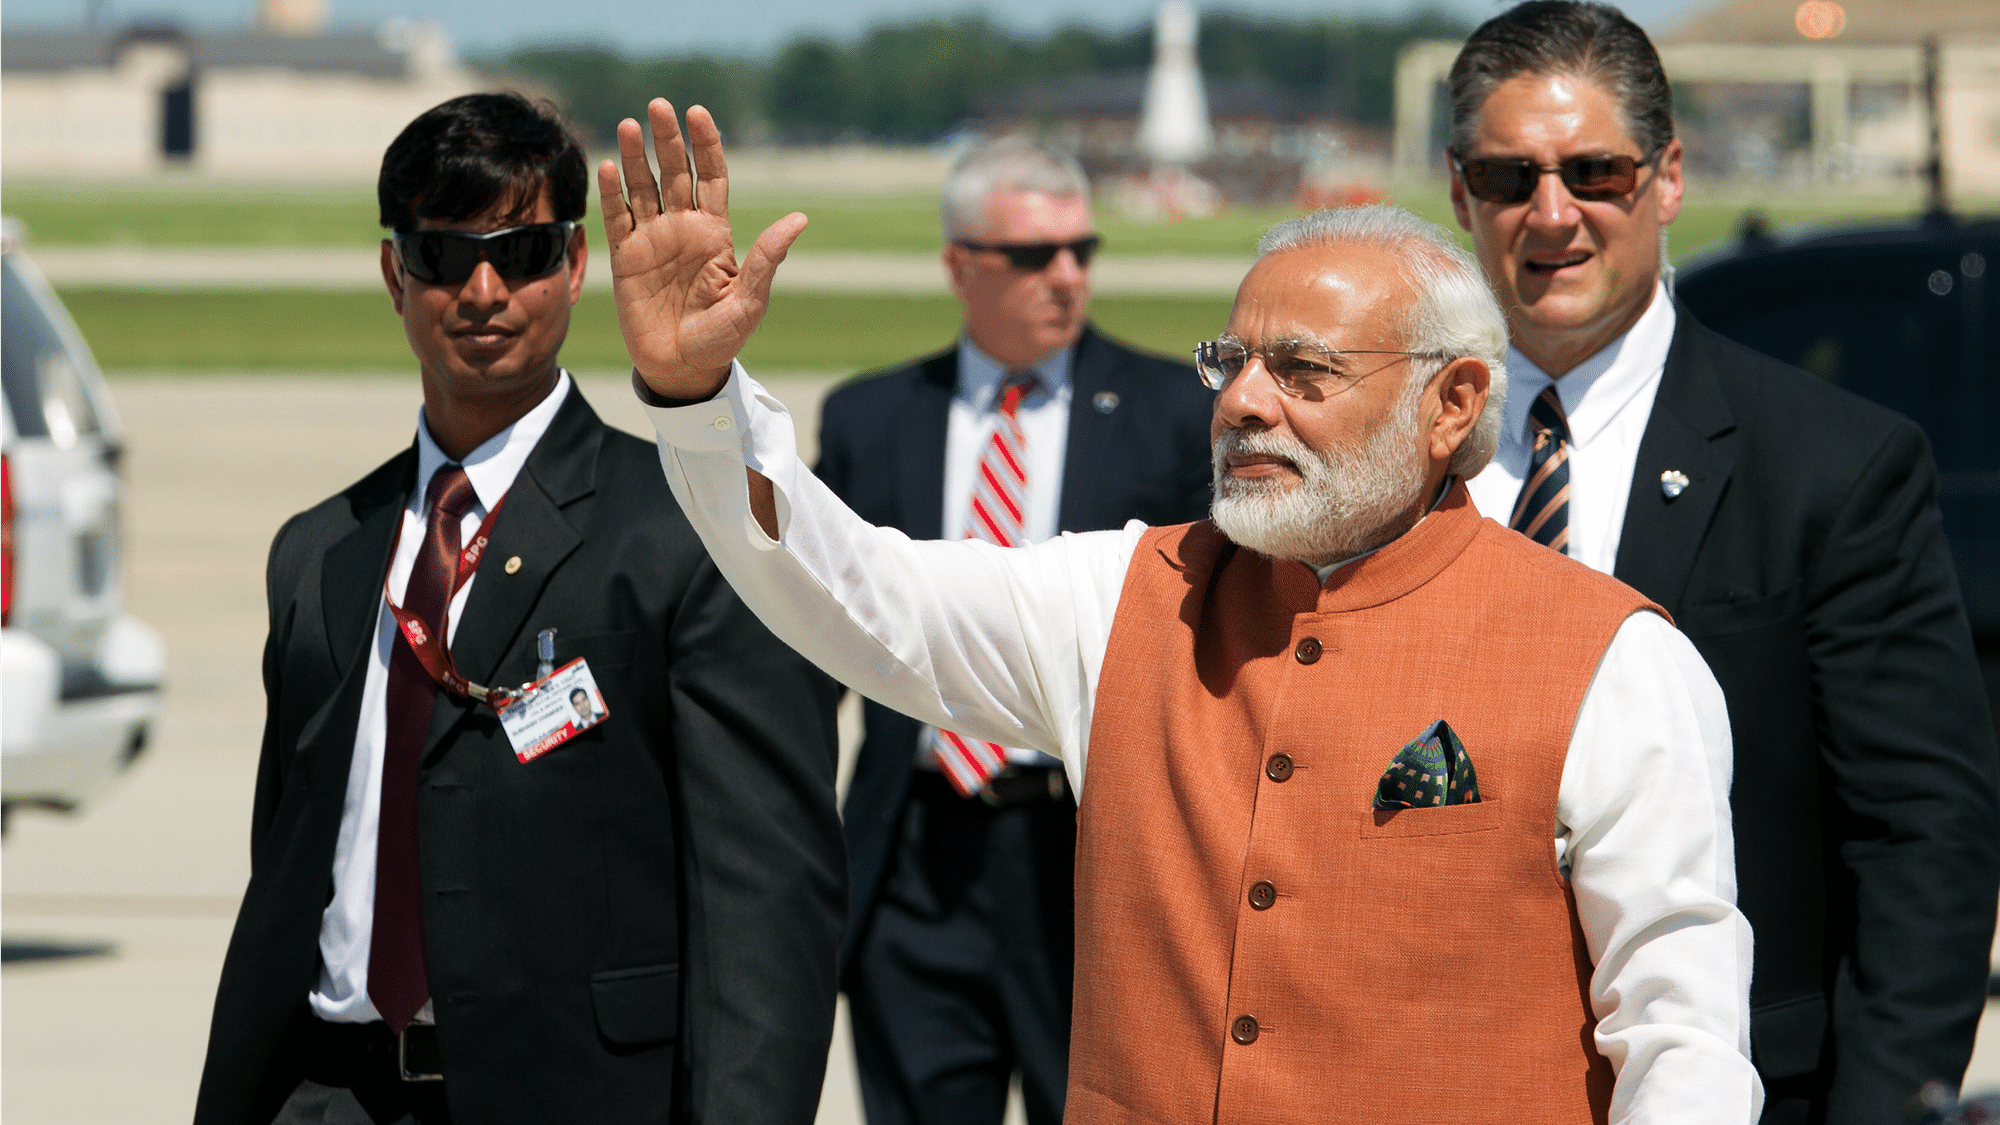 Prime Minister Narendra Modi waves to members of the Indian community in Washington upon his arrival at Andrews Air Force Base, on 6 June.  (Photo: AP)